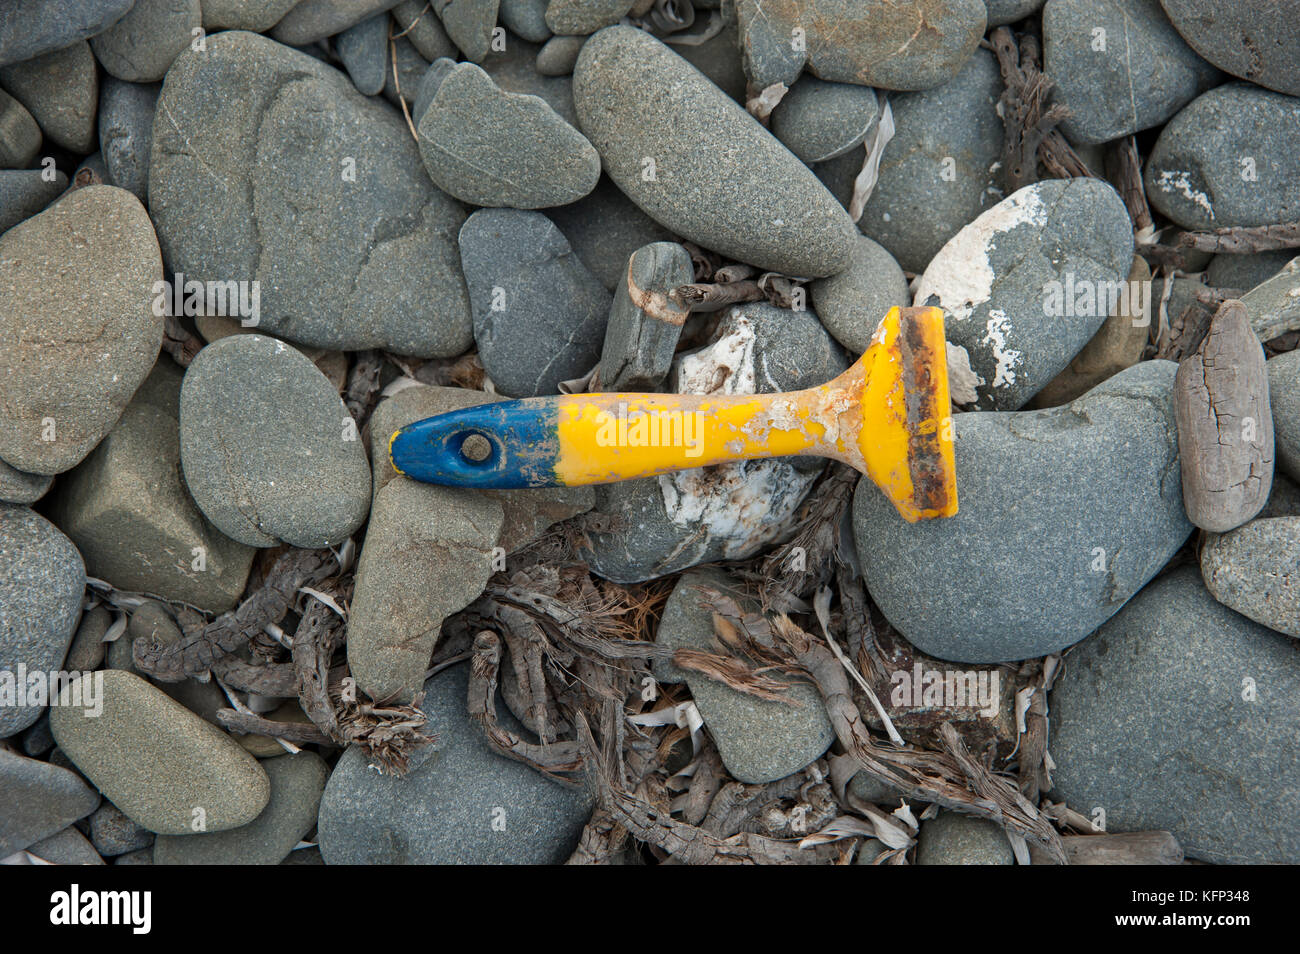 Washed up plastic flotsam and jetsam litter a beach on the island of Menorca in the mediterranean sea Stock Photo